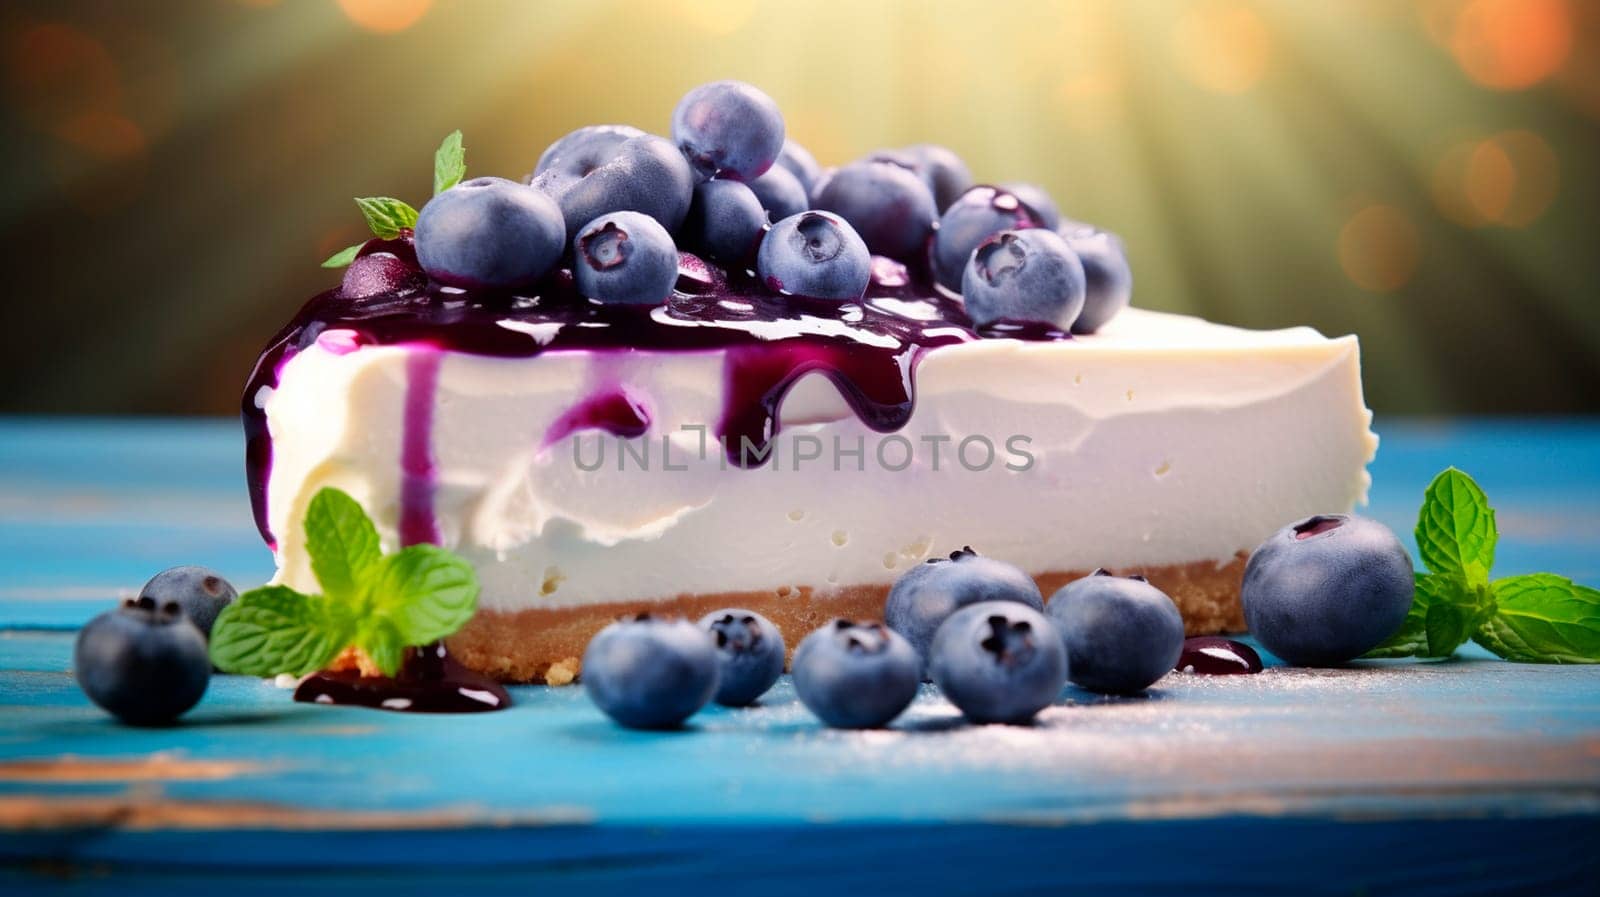 cheesecake with blueberries on a plate. Selective focus. food.